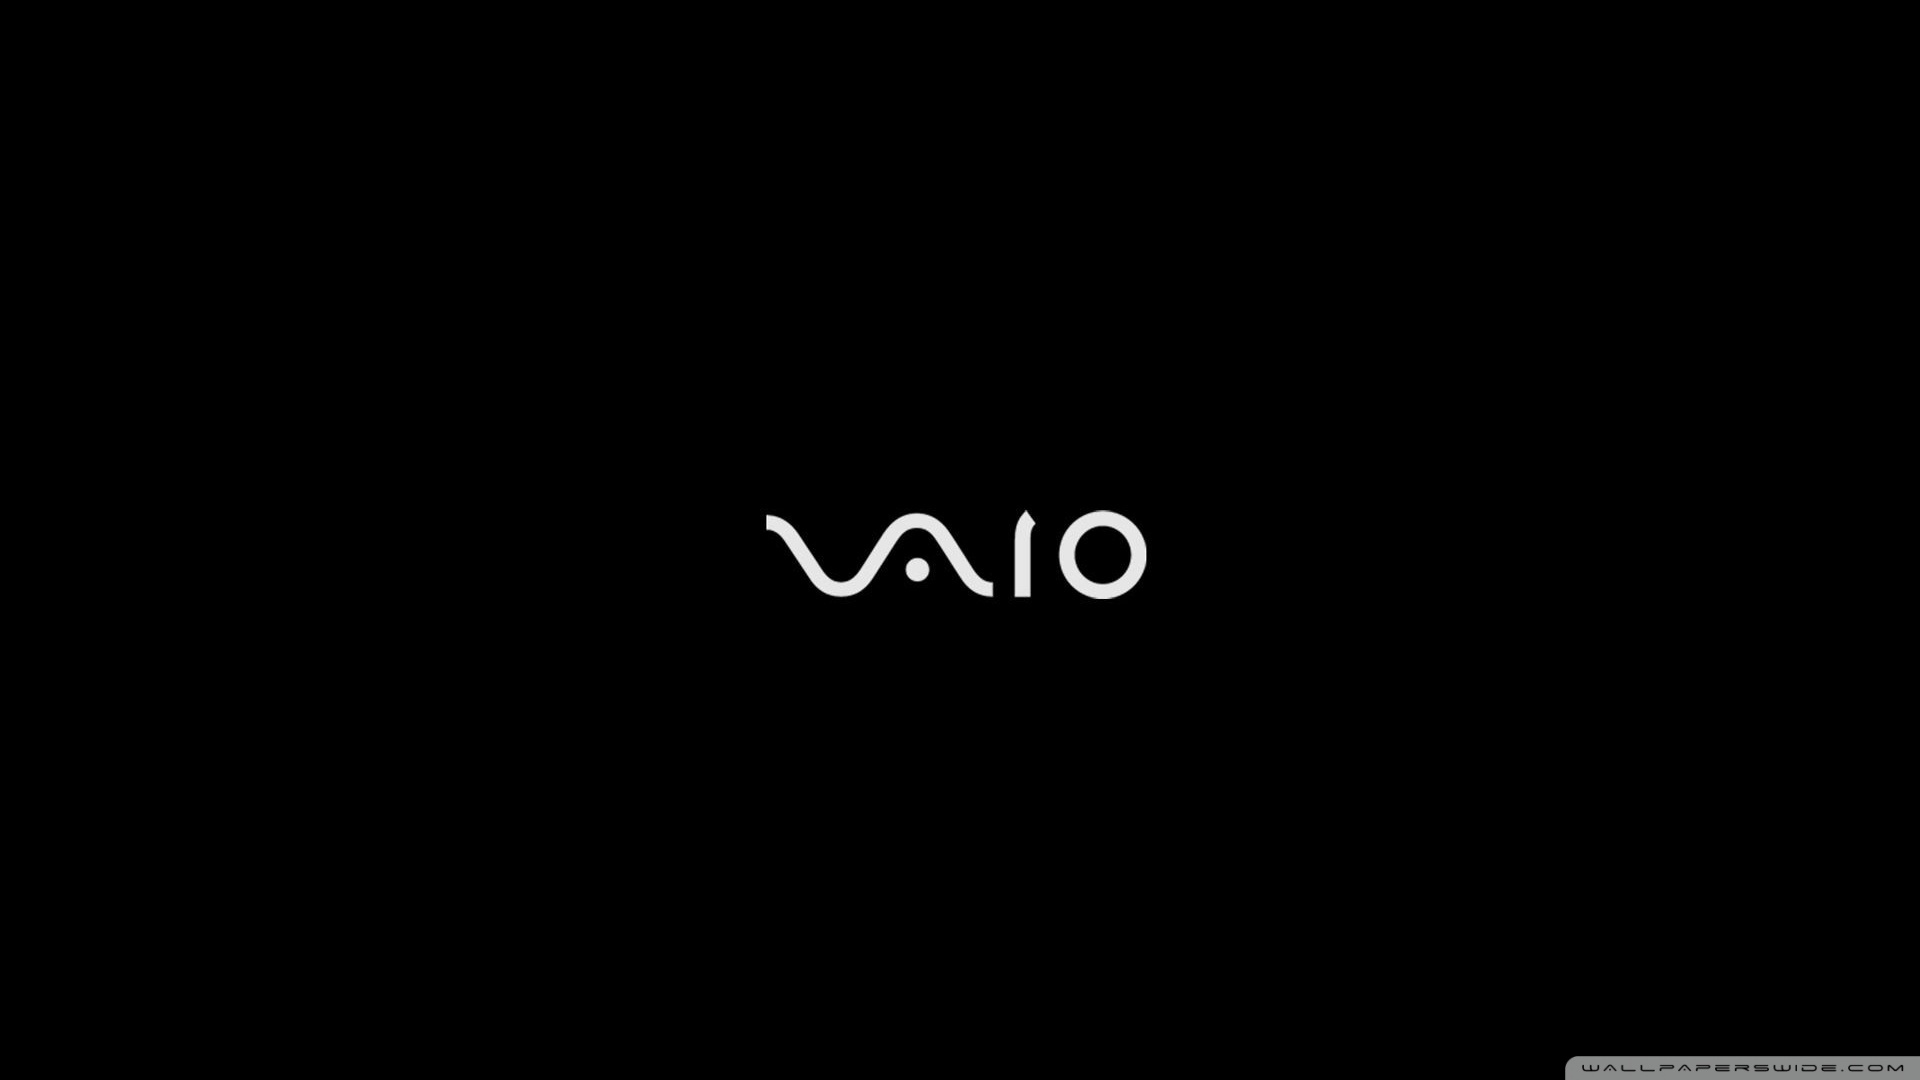 Free Download Sony Vaio Wallpaper 1920x1080 Sony Vaio 1920x1080 For Your Desktop Mobile Tablet Explore 46 Vaio Wallpapers 1366x768 Hd Wallpaper 1366x768 Free 1366x768 Hd Wallpapers Wallpaper For Laptops Free